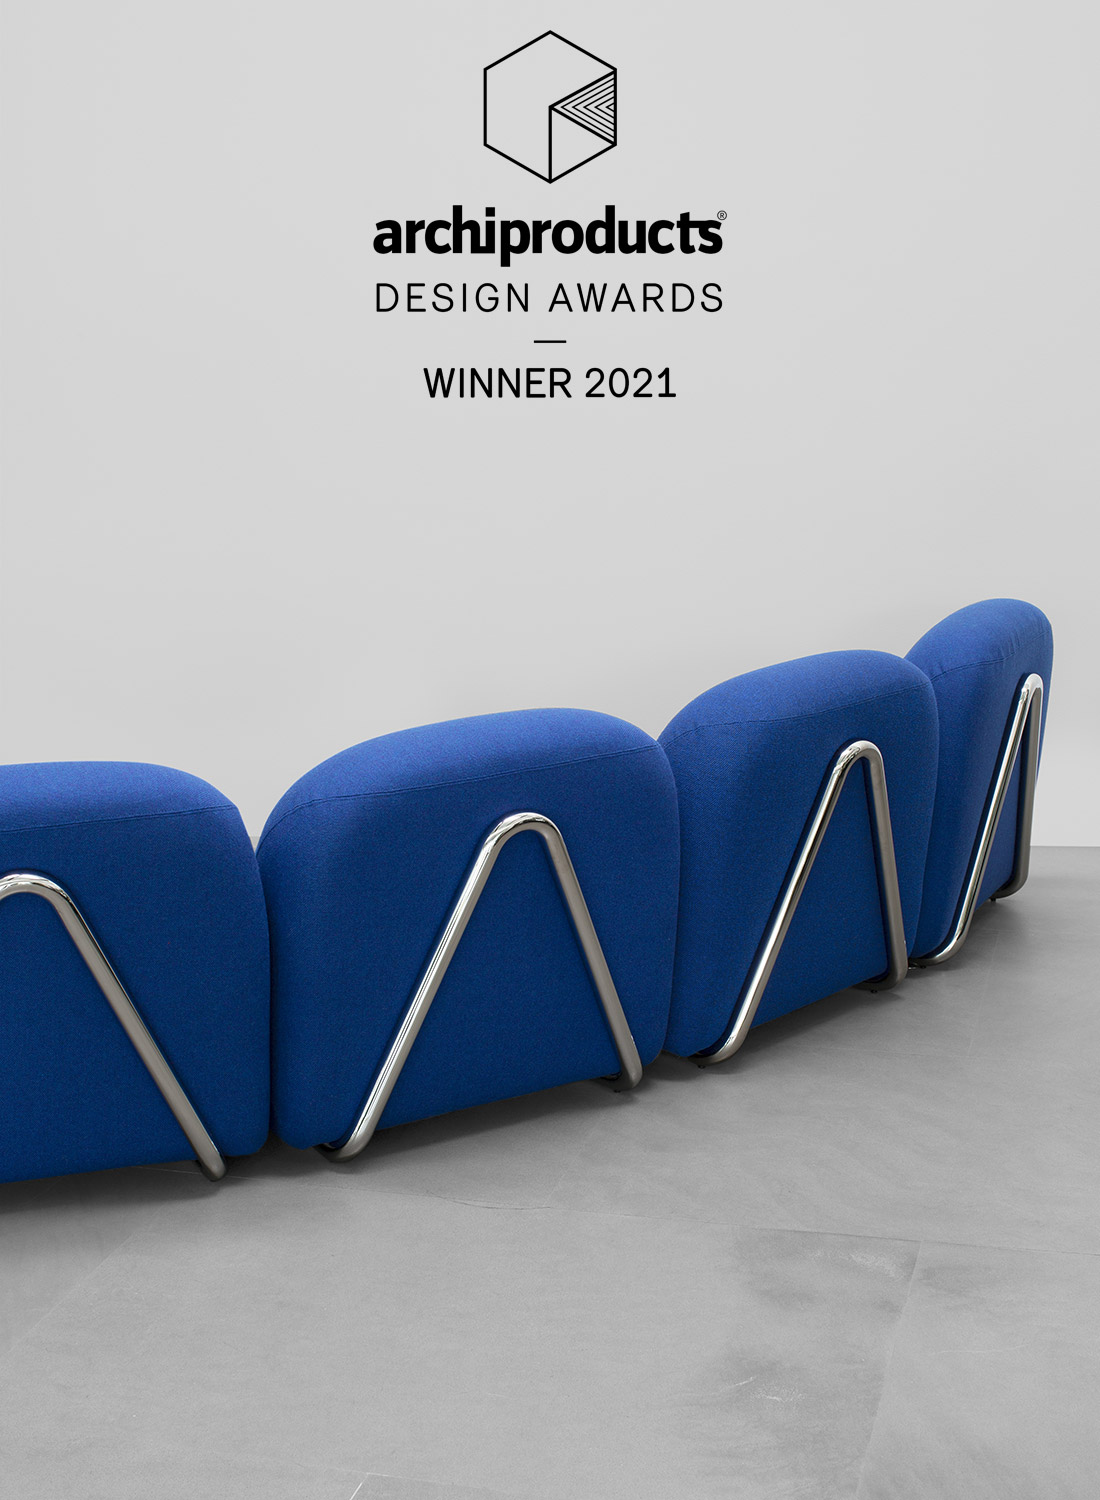 2021 Archiproducts Design Awards Victoria Tacchini 5352